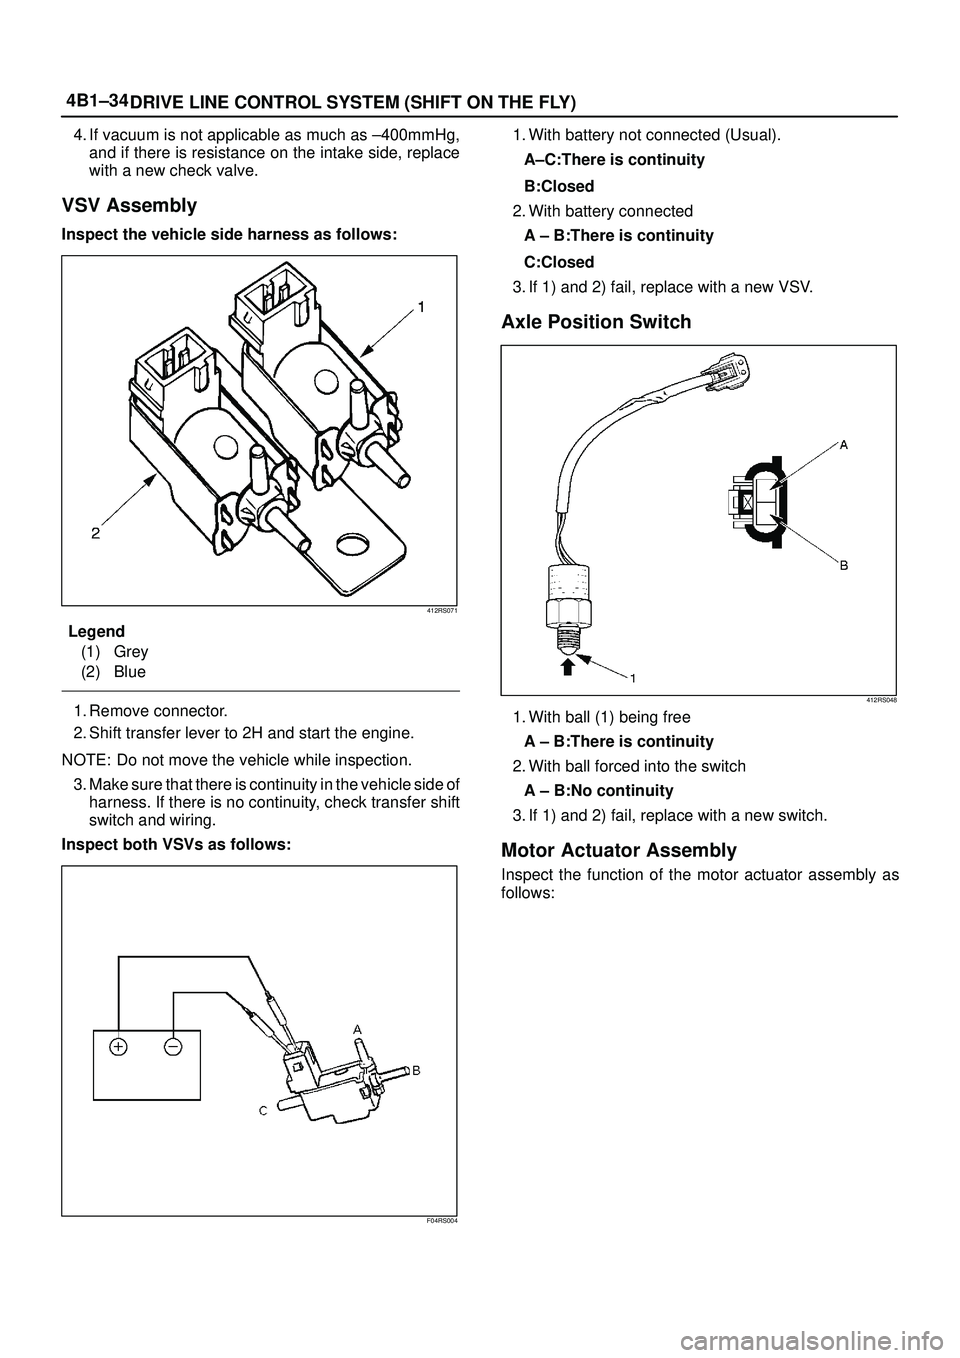 ISUZU TROOPER 1998  Service Repair Manual 4B1±34
DRIVE LINE CONTROL SYSTEM (SHIFT ON THE FLY)
4. If vacuum is not applicable as much as ±400mmHg,
and if there is resistance on the intake side, replace
with a new check valve.
VSV Assembly
In